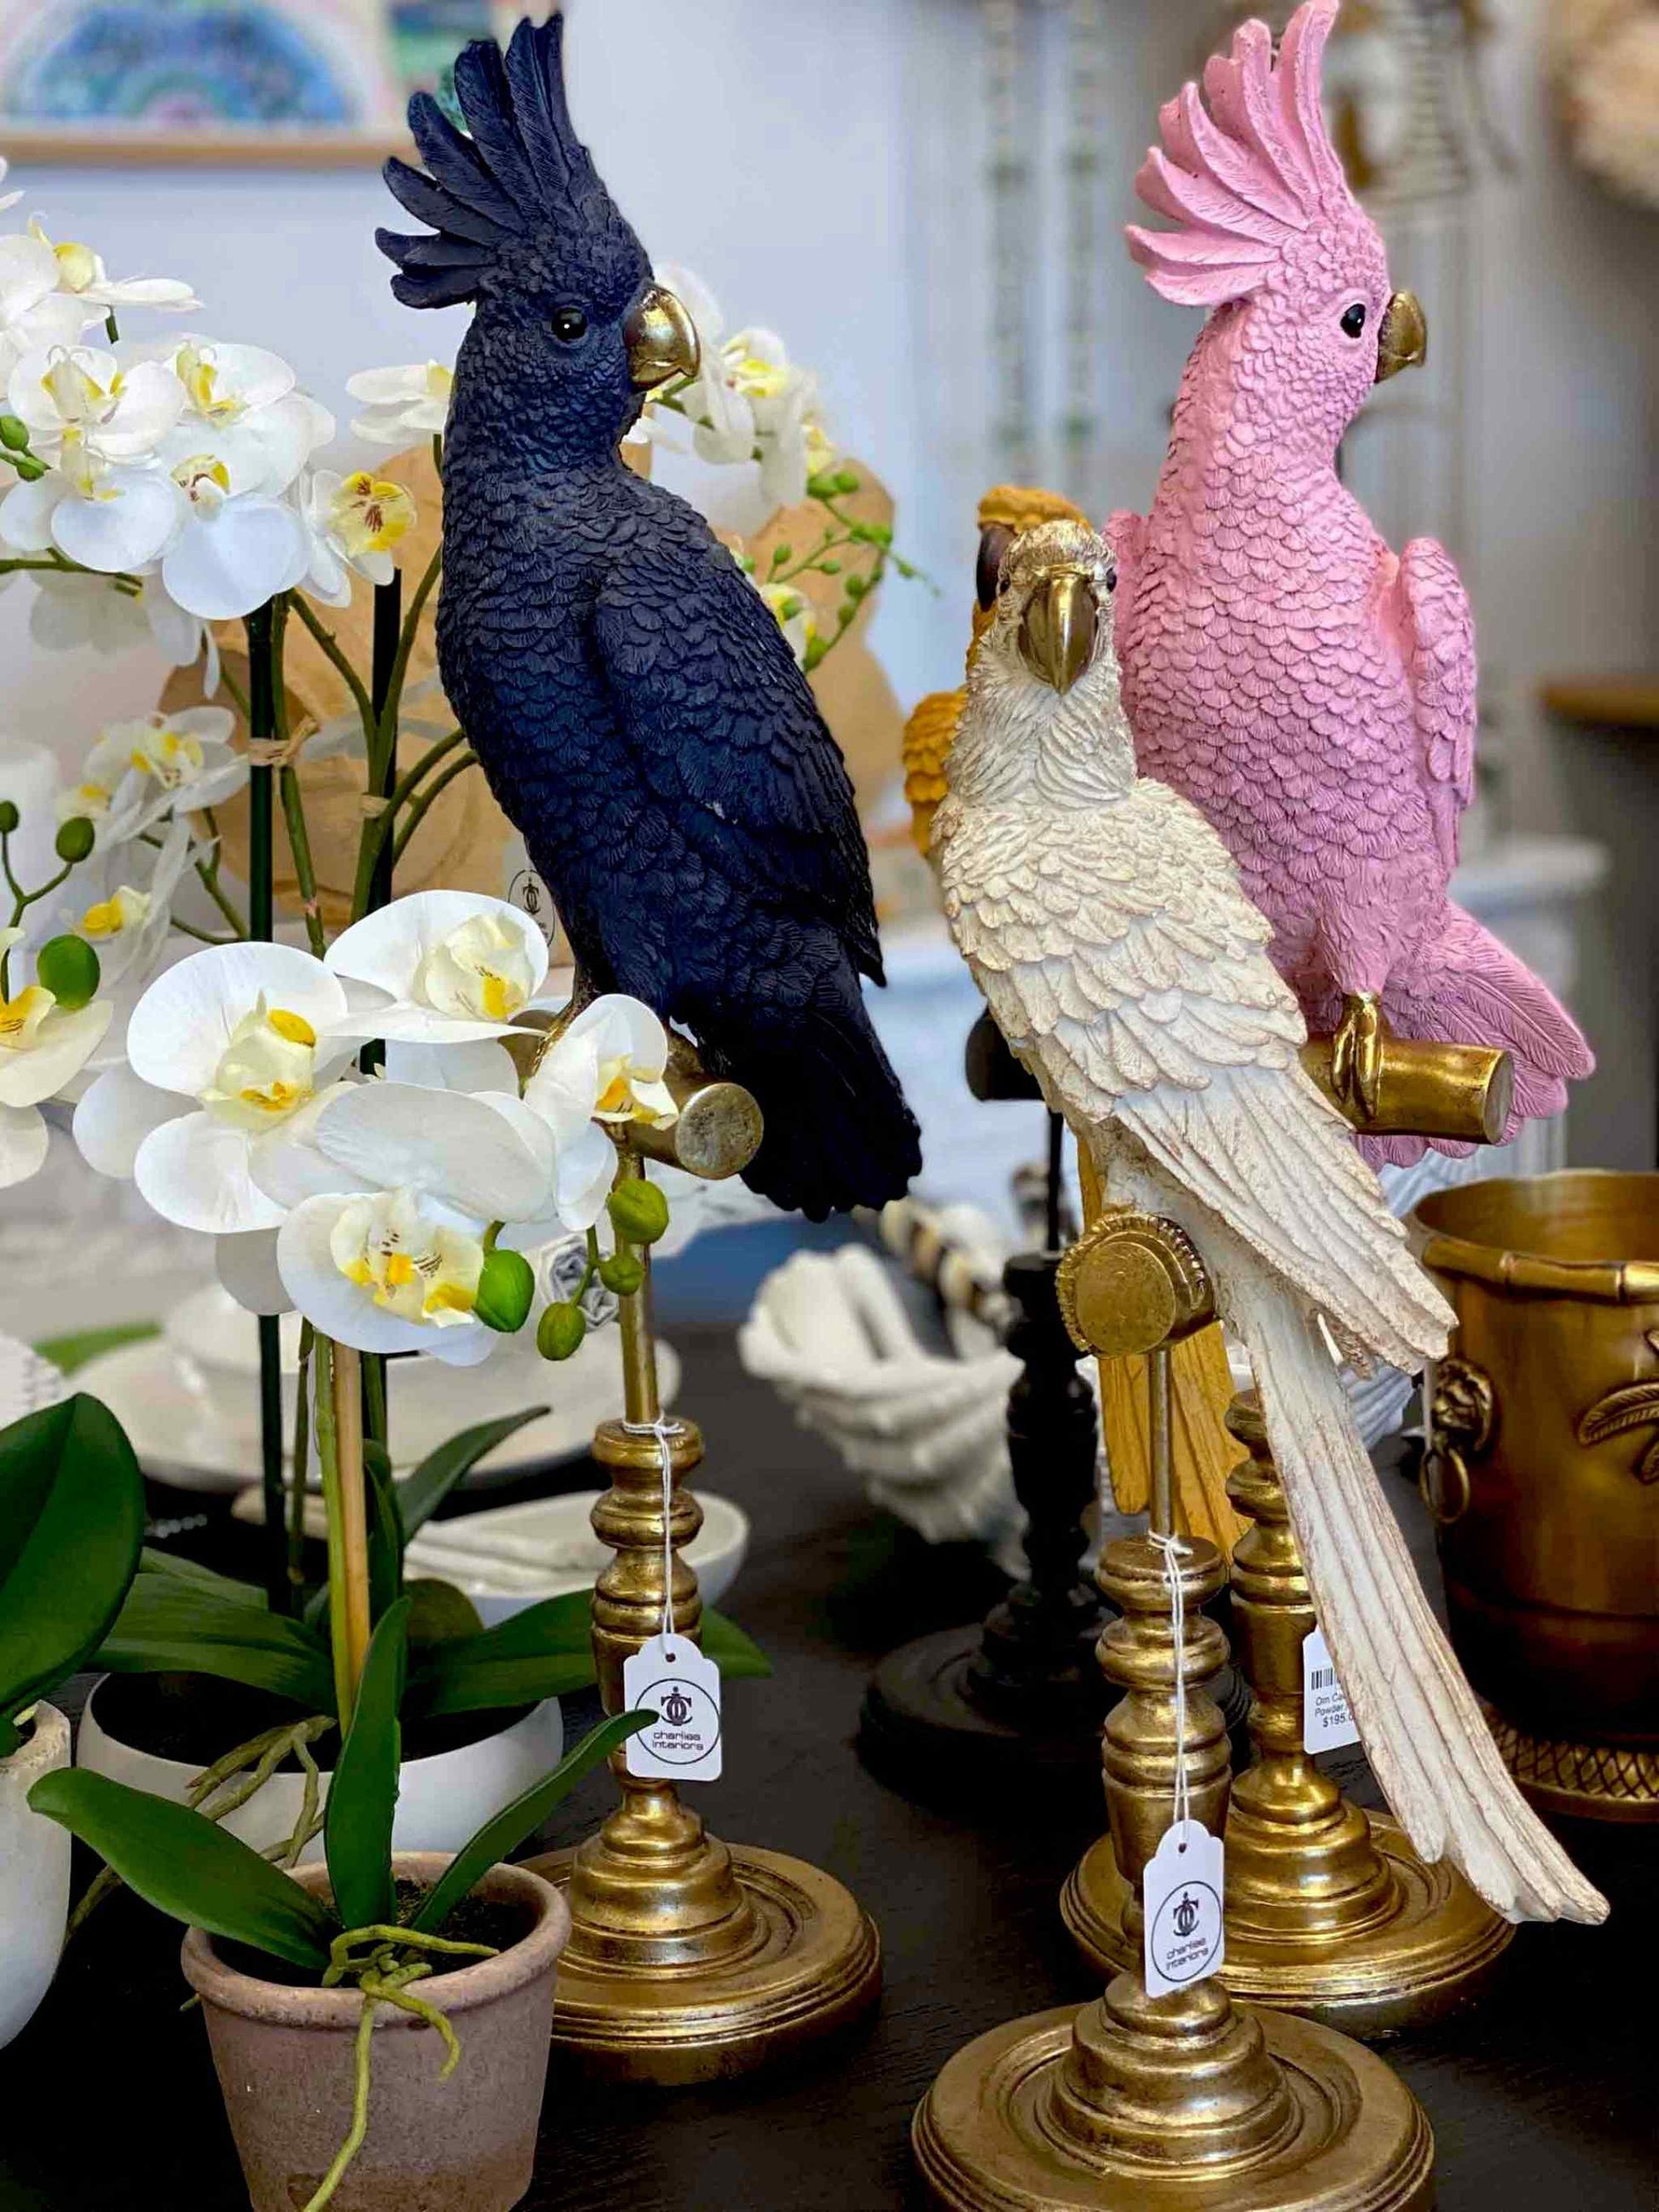 Large Tropical Decorative Parrot on Stand Aviary White by C.A.M 45 cm